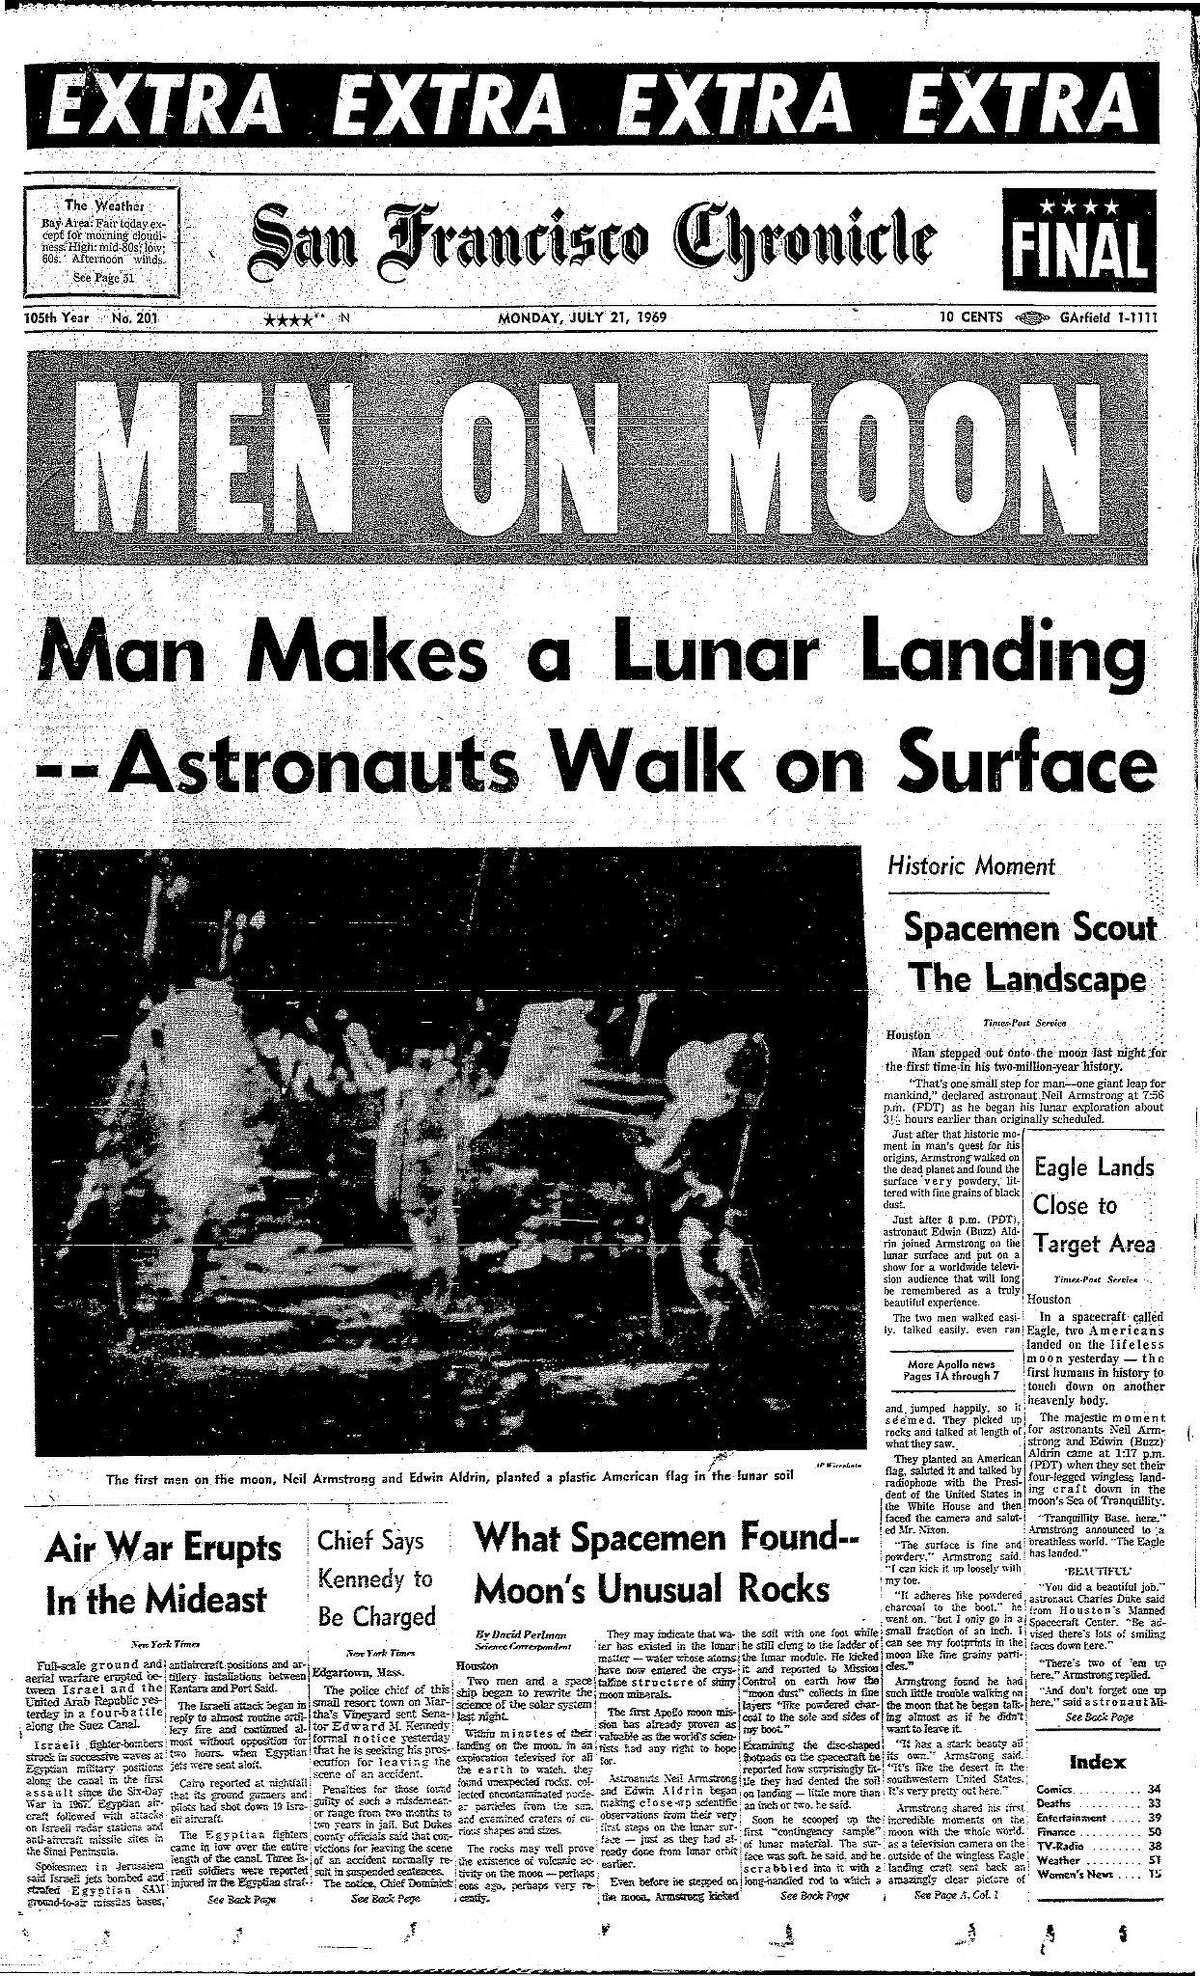 Historic Chronicle Front Page July 21, 1969 American astronauts walk on the Moon Chron365, Chroncover